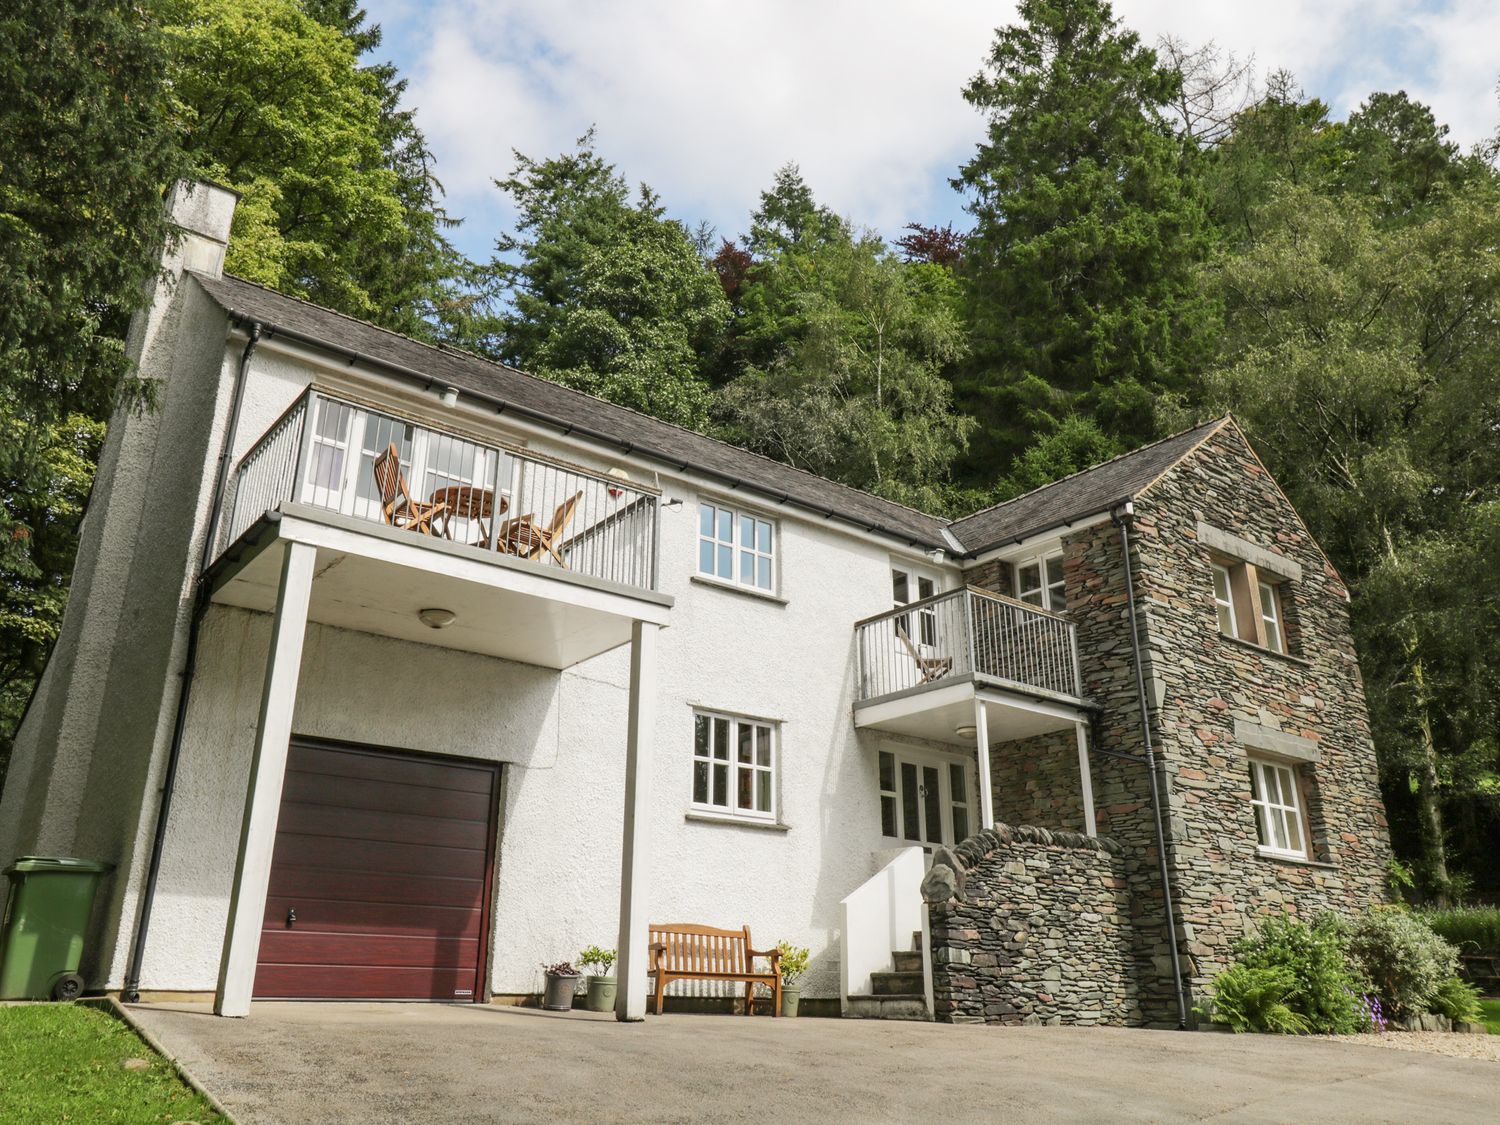 Orchard House - Lake District - 1042654 - photo 1